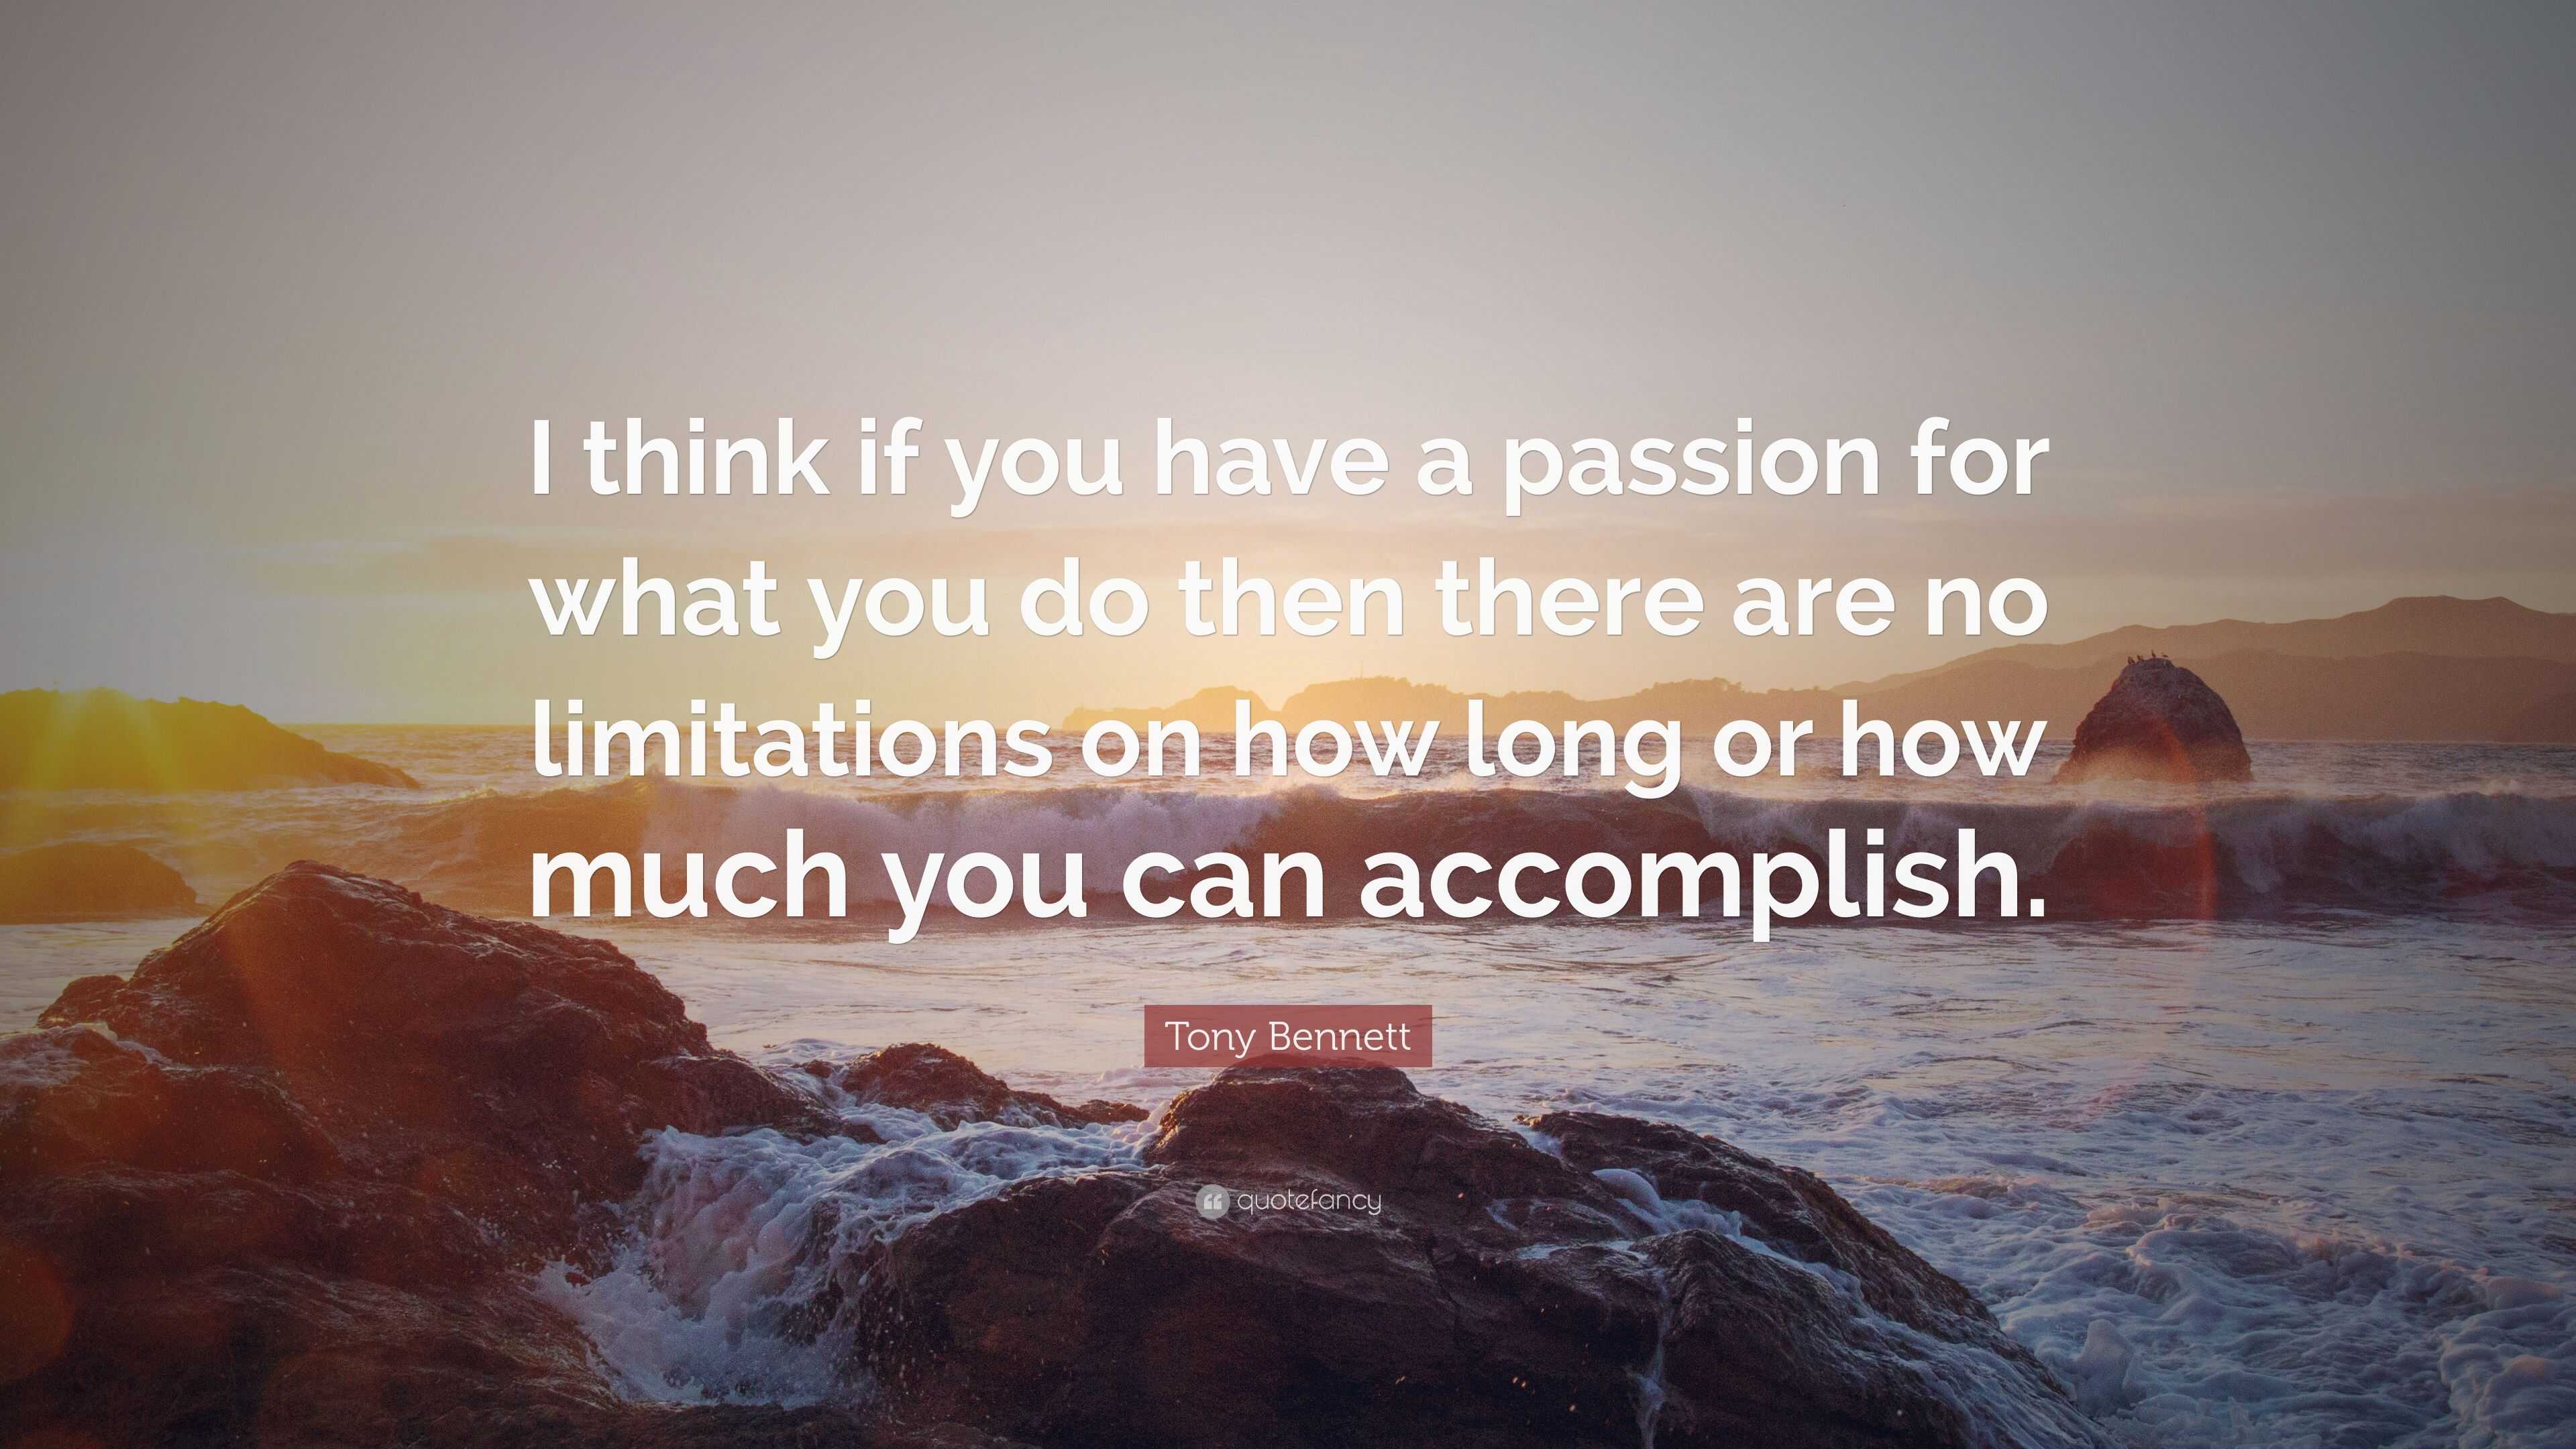 Tony Bennett Quote “i Think If You Have A Passion For What You Do Then There Are No Limitations